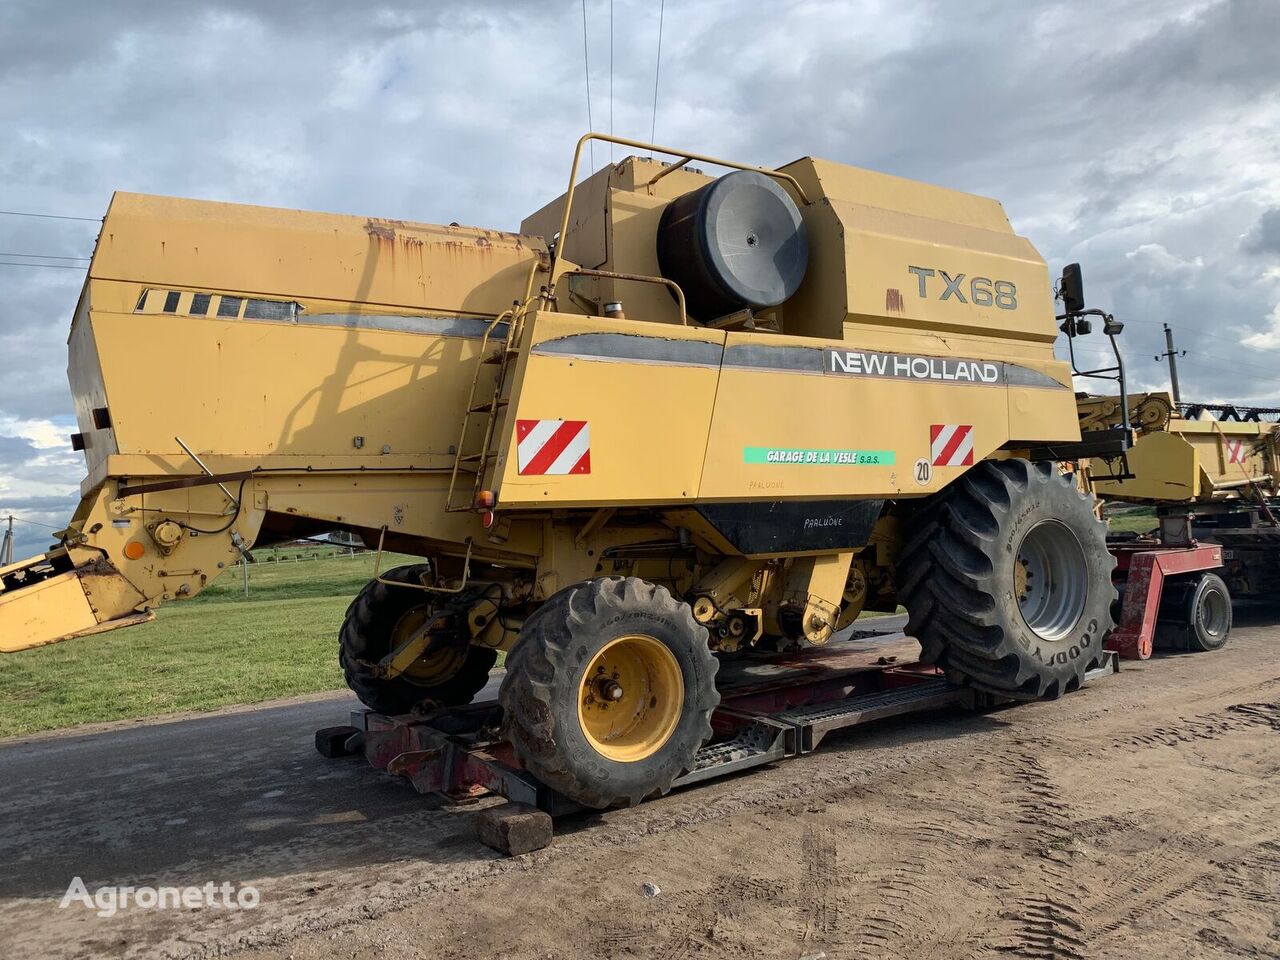 New Holland TX68 grain harvester for parts